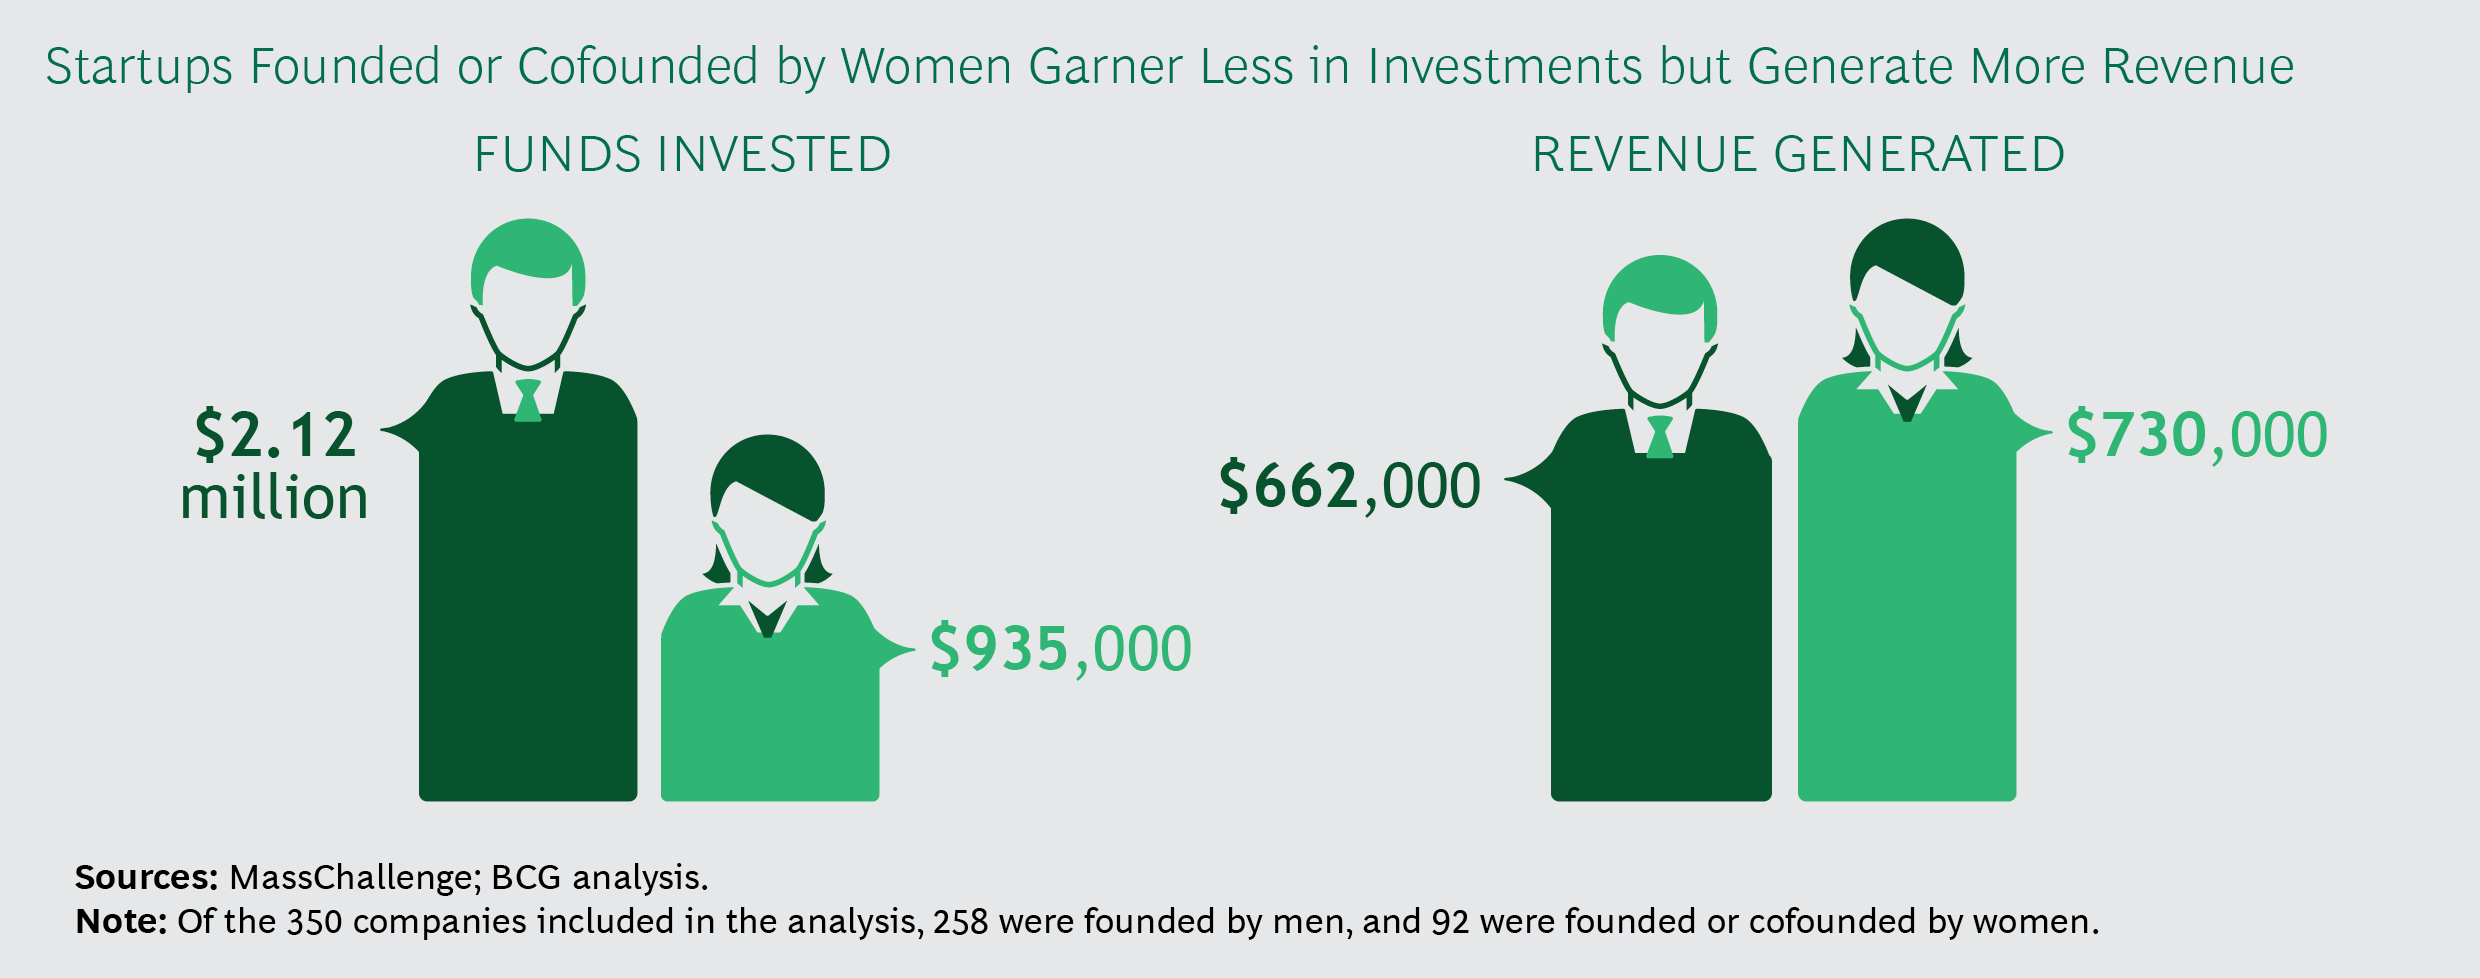 Sourced from MassChallenge;BCG analysis. Startups founded or cofounder by Women Garner Less in Investments but Generate More Revenue. A male silhouette in dark green is twice as large as the female silhouette in light green to reflect the funding difference, $2.2M for men and $935K for women. For Revenue Generated, the female silhouette is slightly larger than the male, reflecting $730K to $662K in revenue.